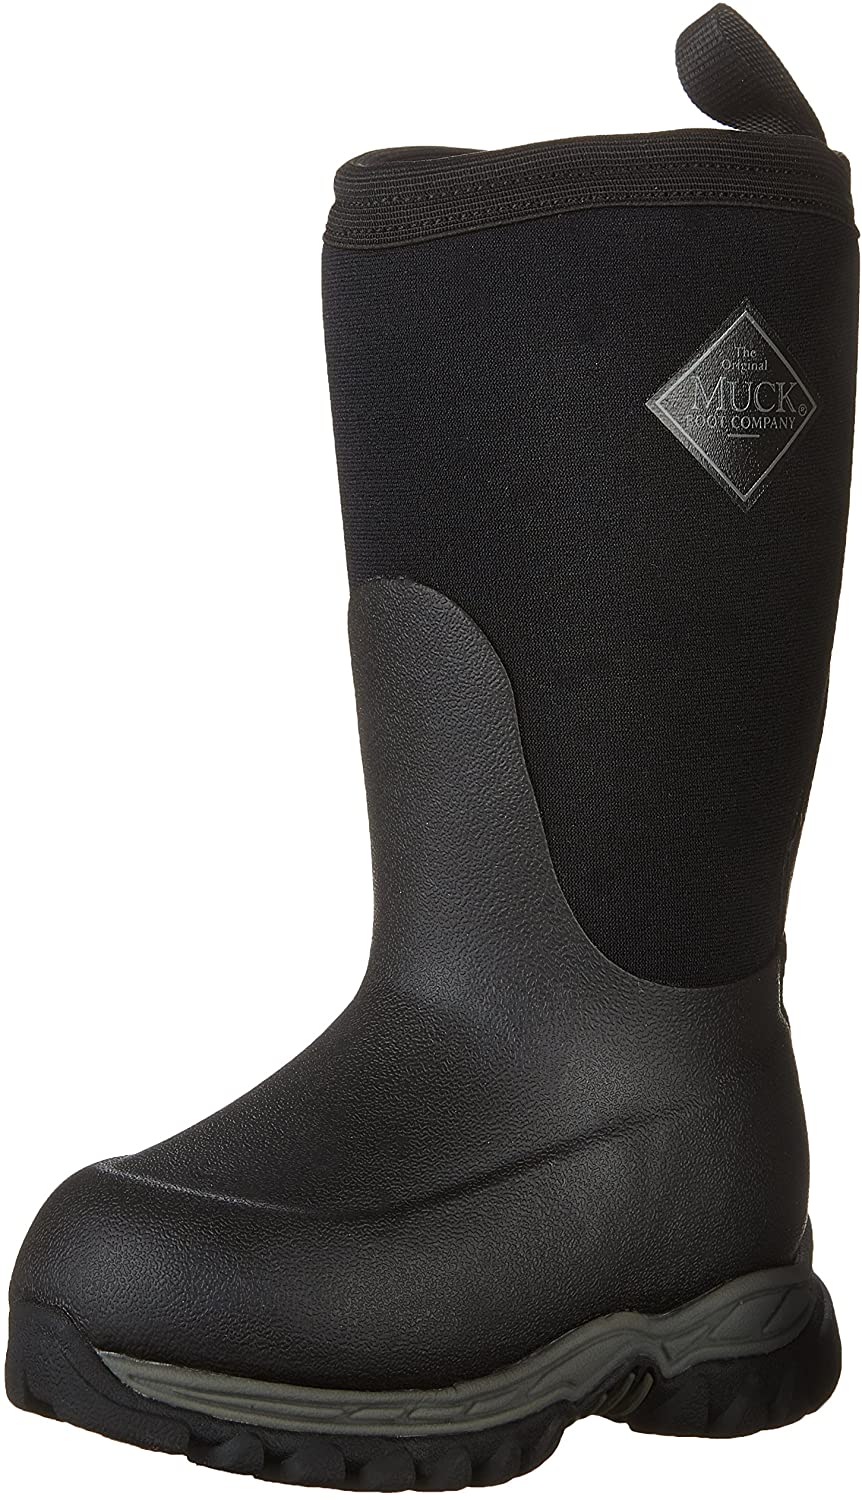 Kids' Muck Boot Rugged II Winter Boot in Black/Black from the side